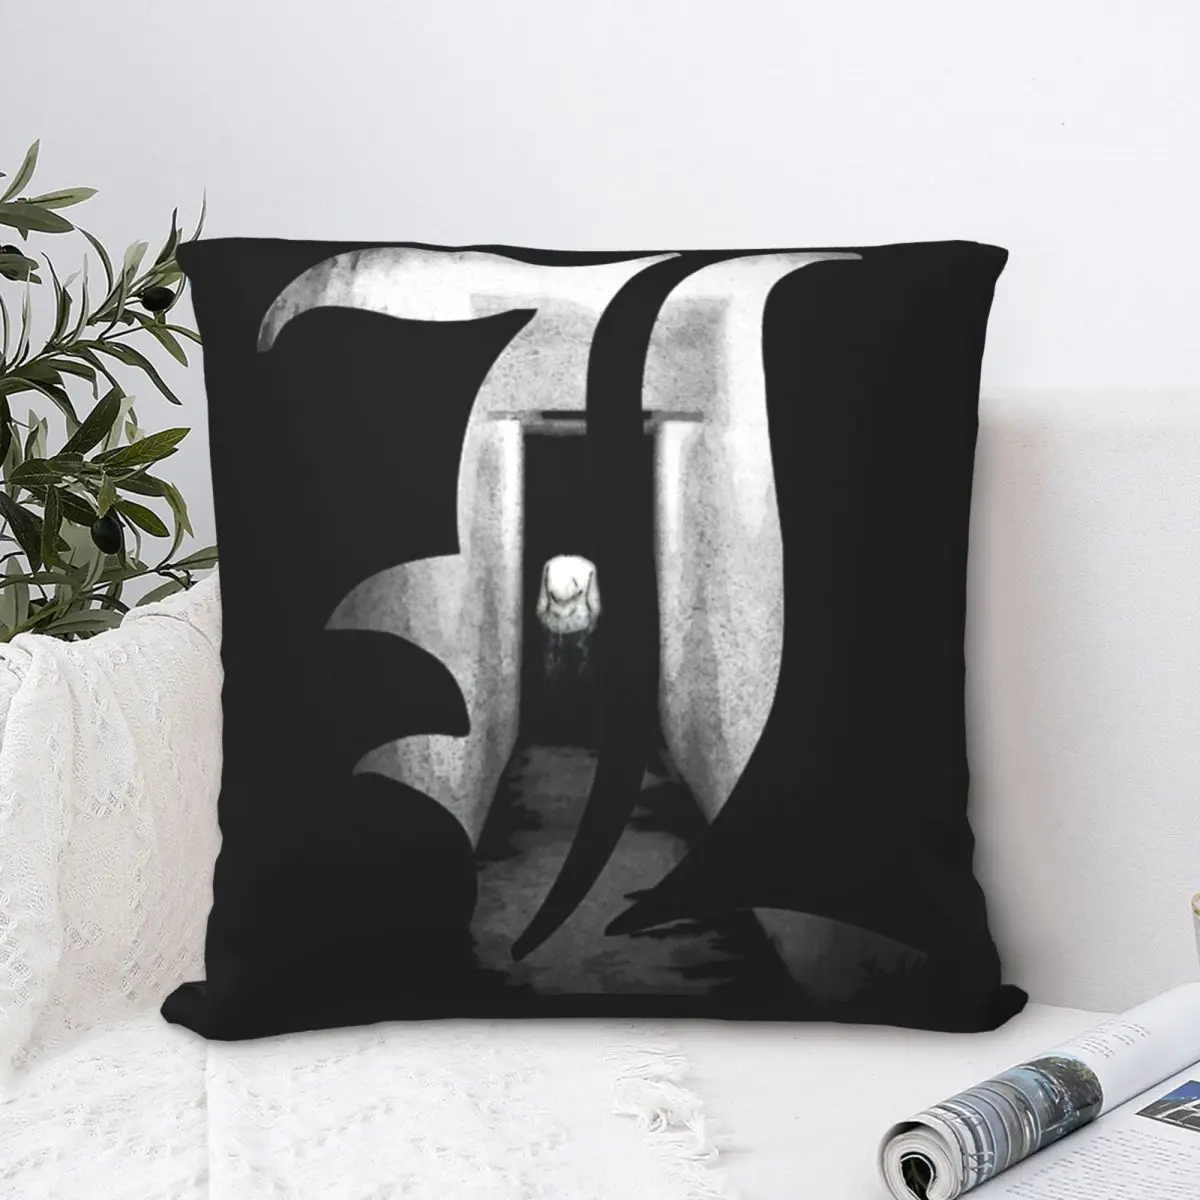 Death Note Manga Pillowcase Printing Polyester Cushion Cover Decorative Anime Notebook Pillow Case Cover Chair 40X40cm